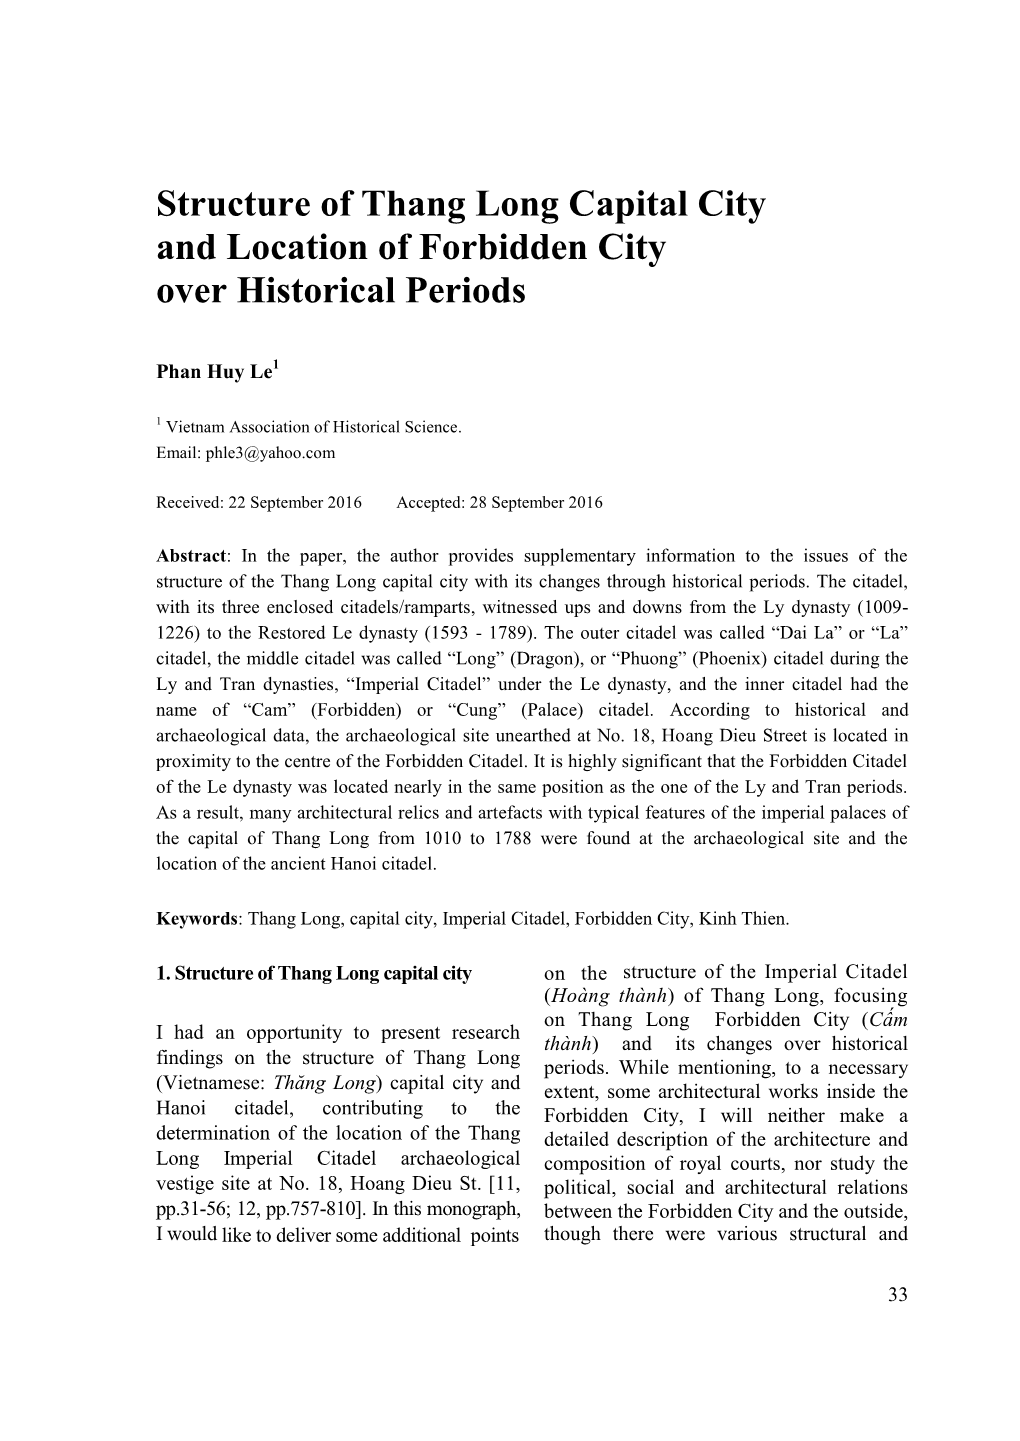 Structure of Thang Long Capital City and Location of Forbidden City Over Historical Periods